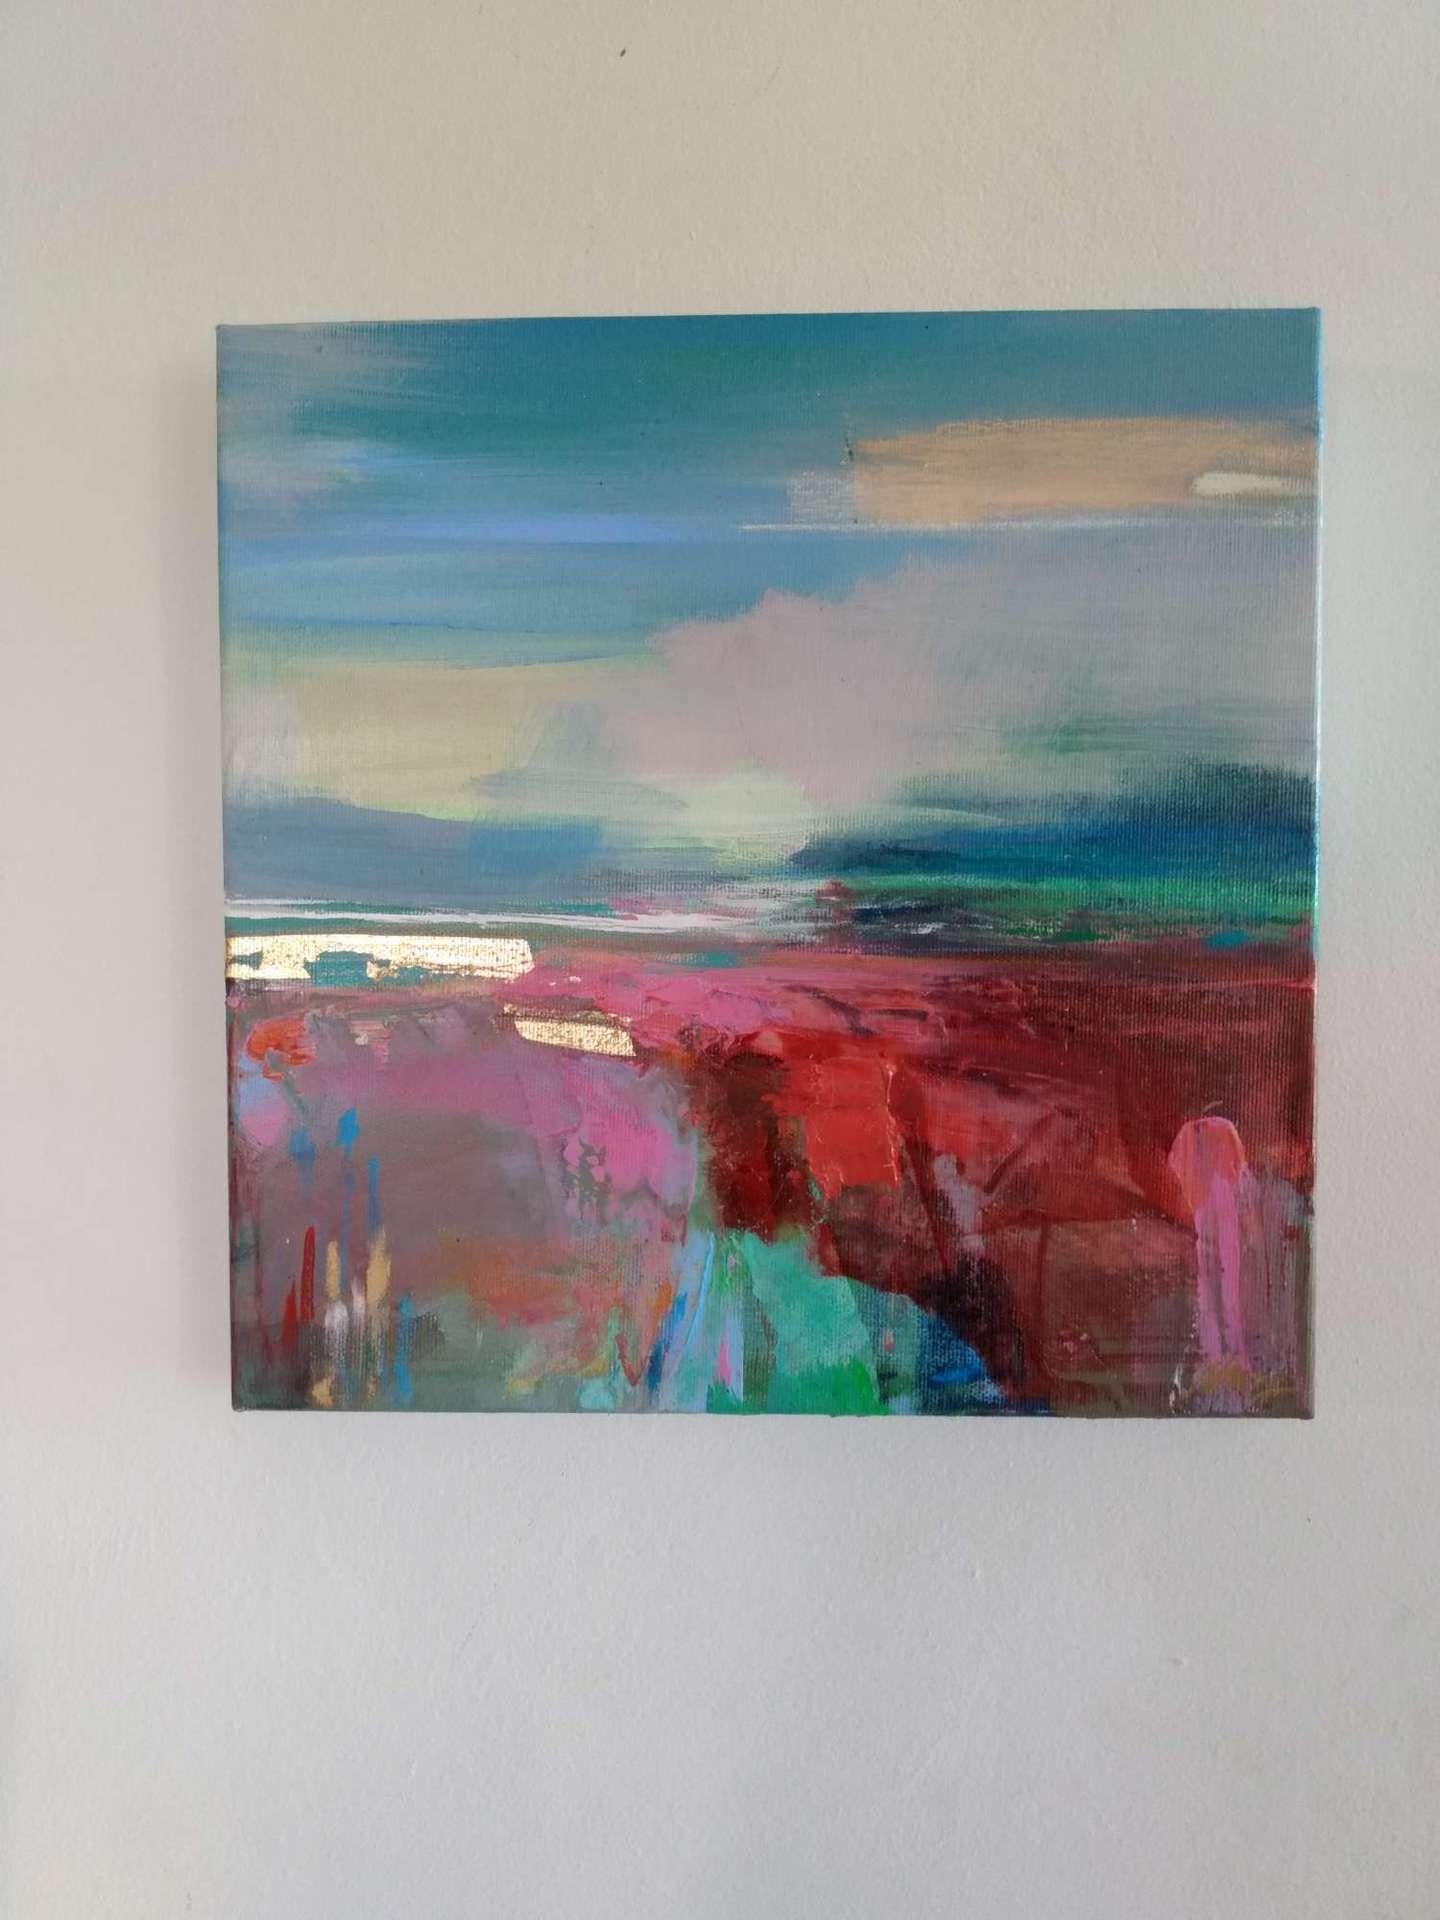 Magdalena Morey
Exploring Every Path 3
Original Cubist Inspired Landscape Painting
Mixed Media on Canvas
Canvas Size: H 30cm x W 30cm x D 3.5cm
Sold Unframed
(Please note that in situ images are purely an indication of how a piece may